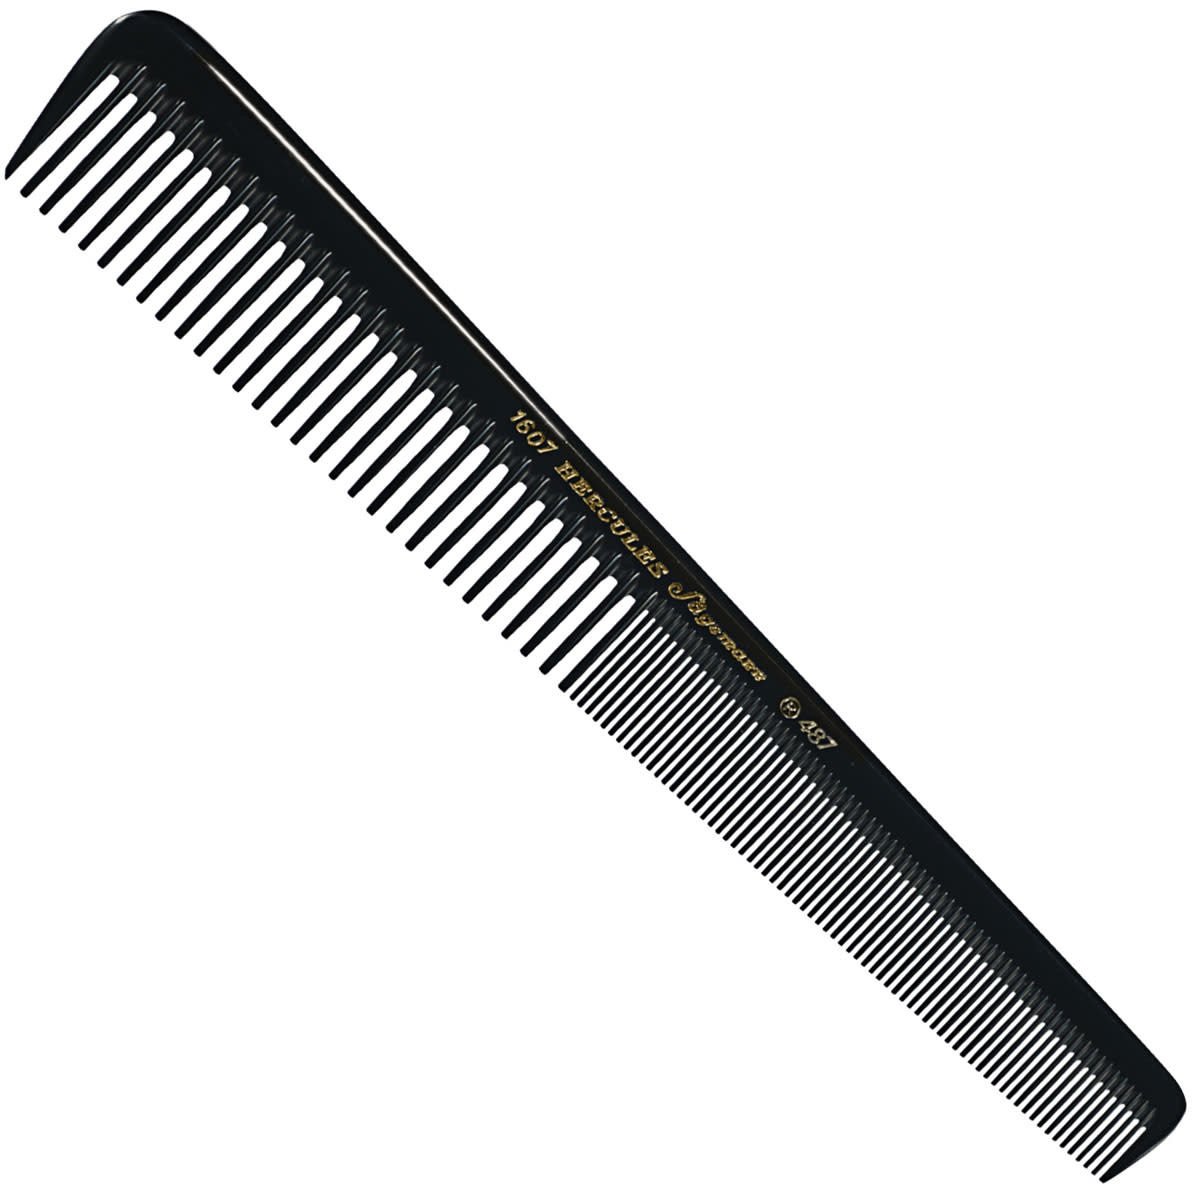 Barber 7-1/2" Styling Comb - HER1607C